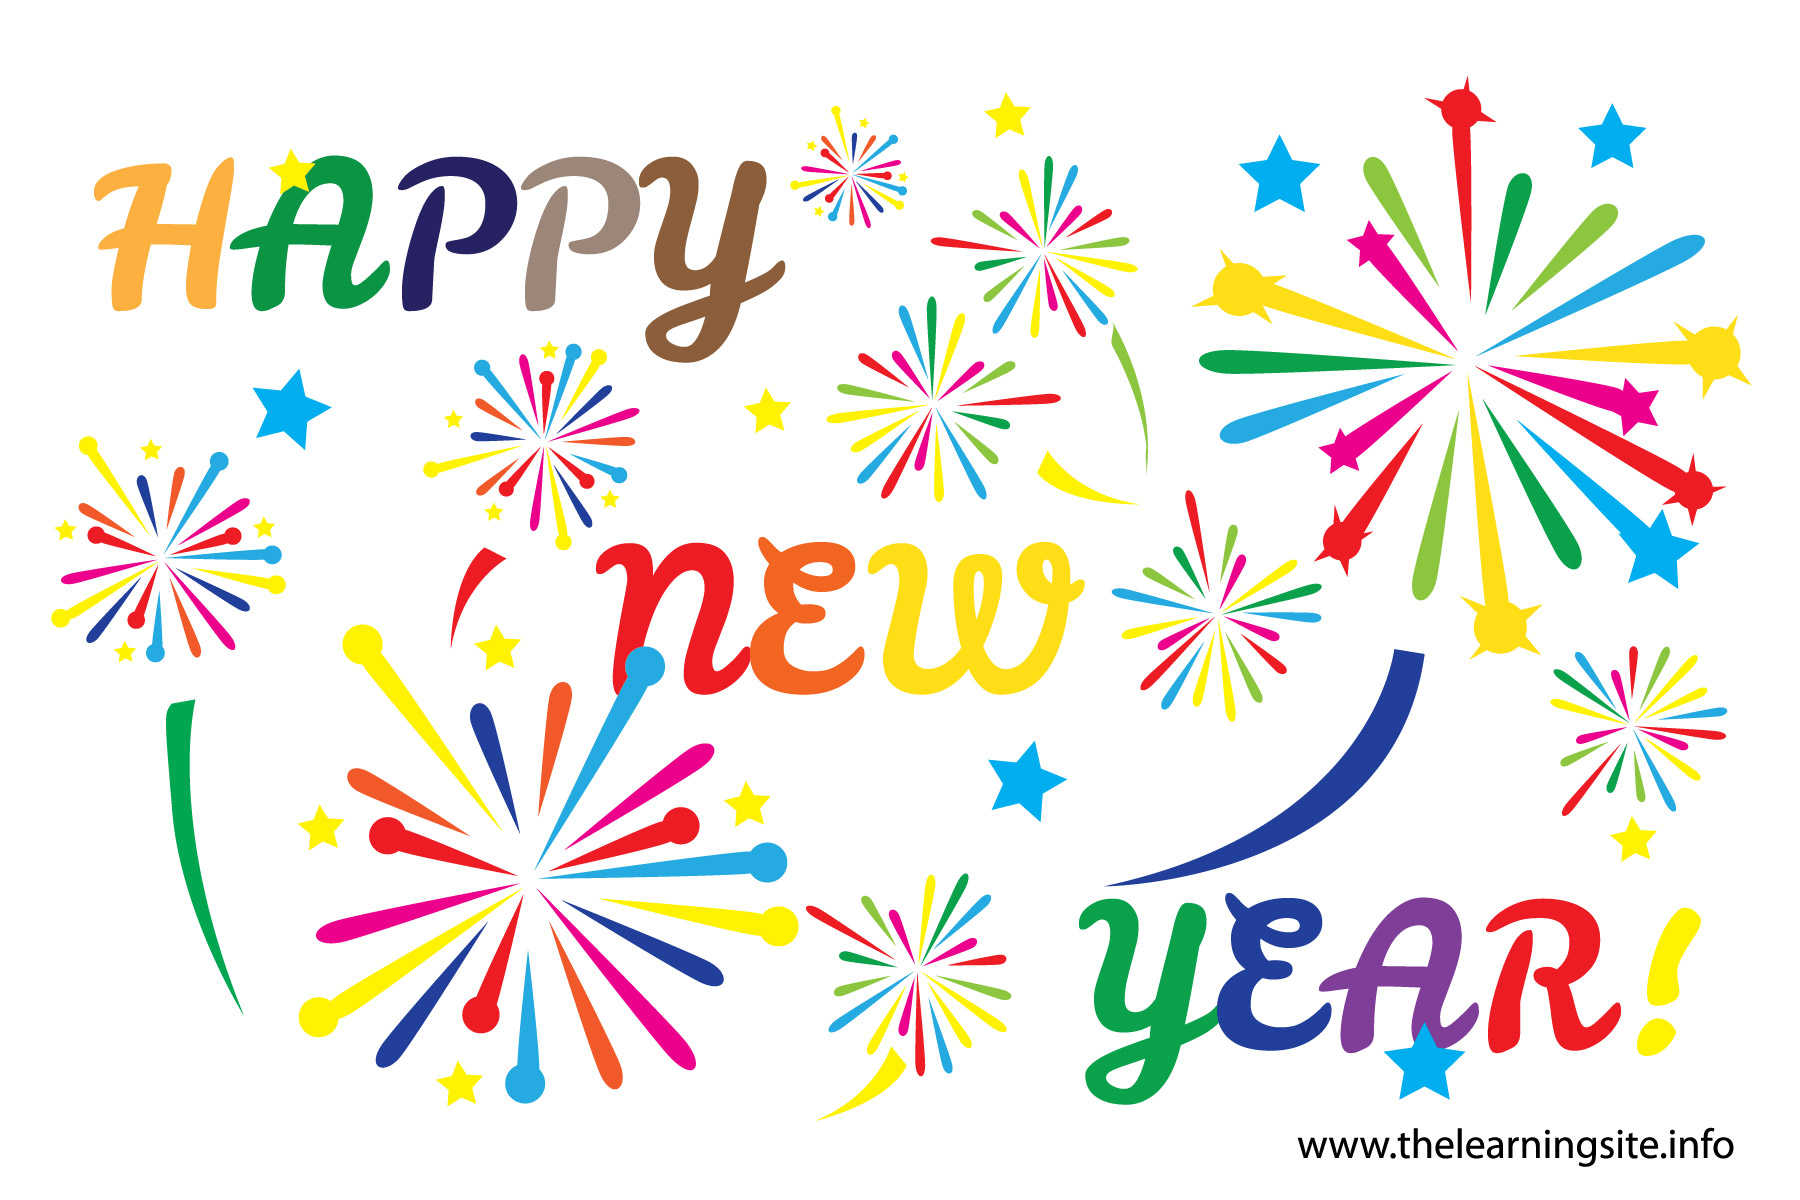 free-happy-new-year-clipart-4